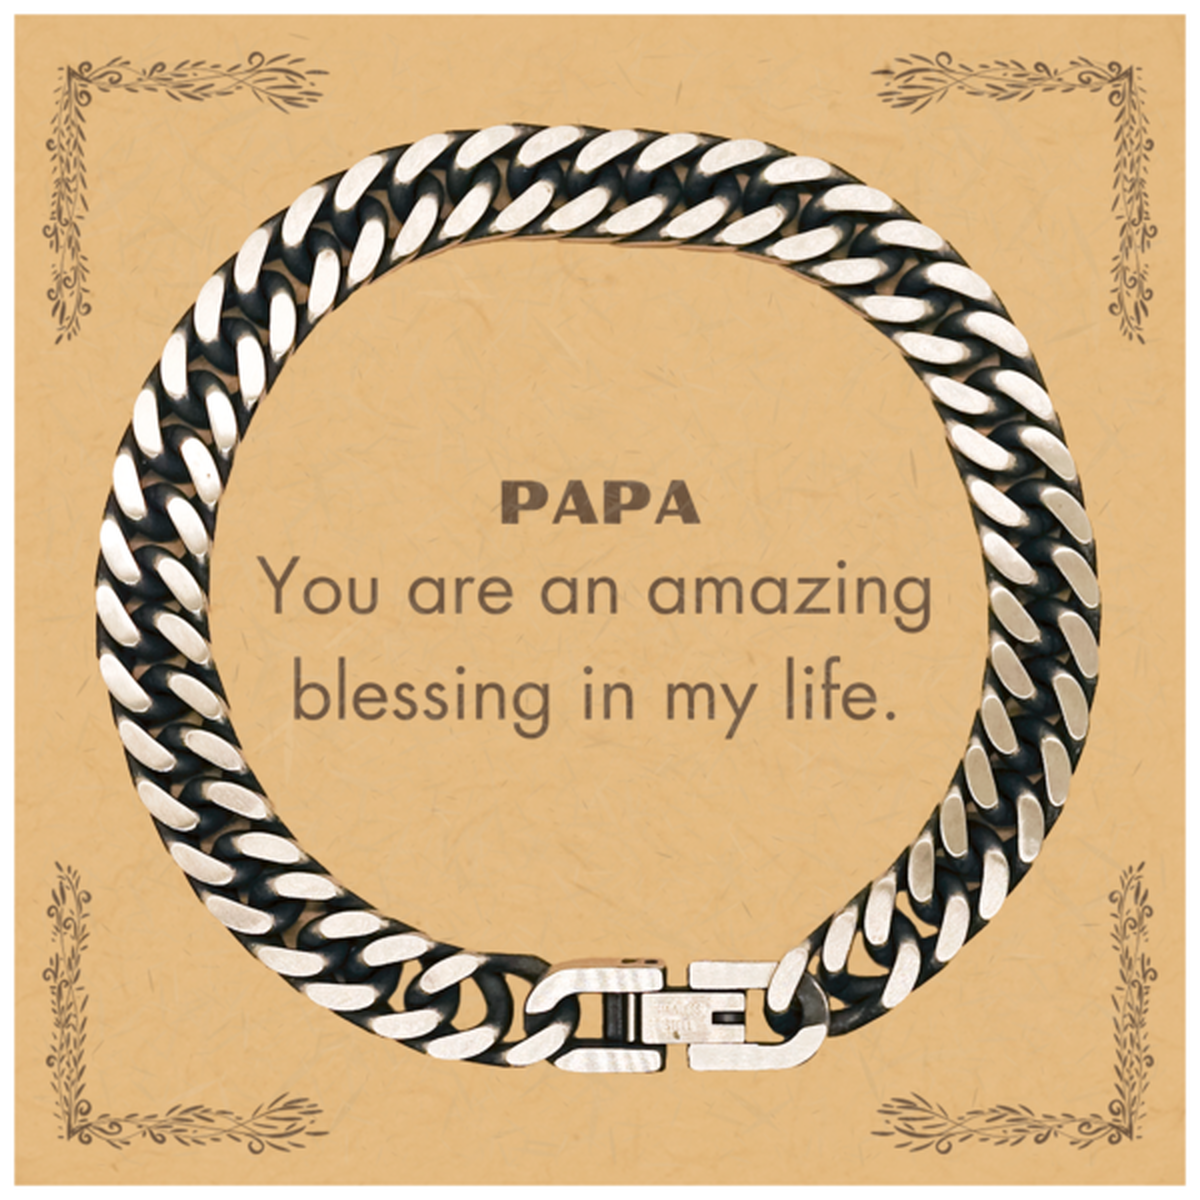 Papa Cuban Link Chain Bracelet, You are an amazing blessing in my life, Thank You Gifts For Papa, Inspirational Birthday Christmas Unique Gifts For Papa